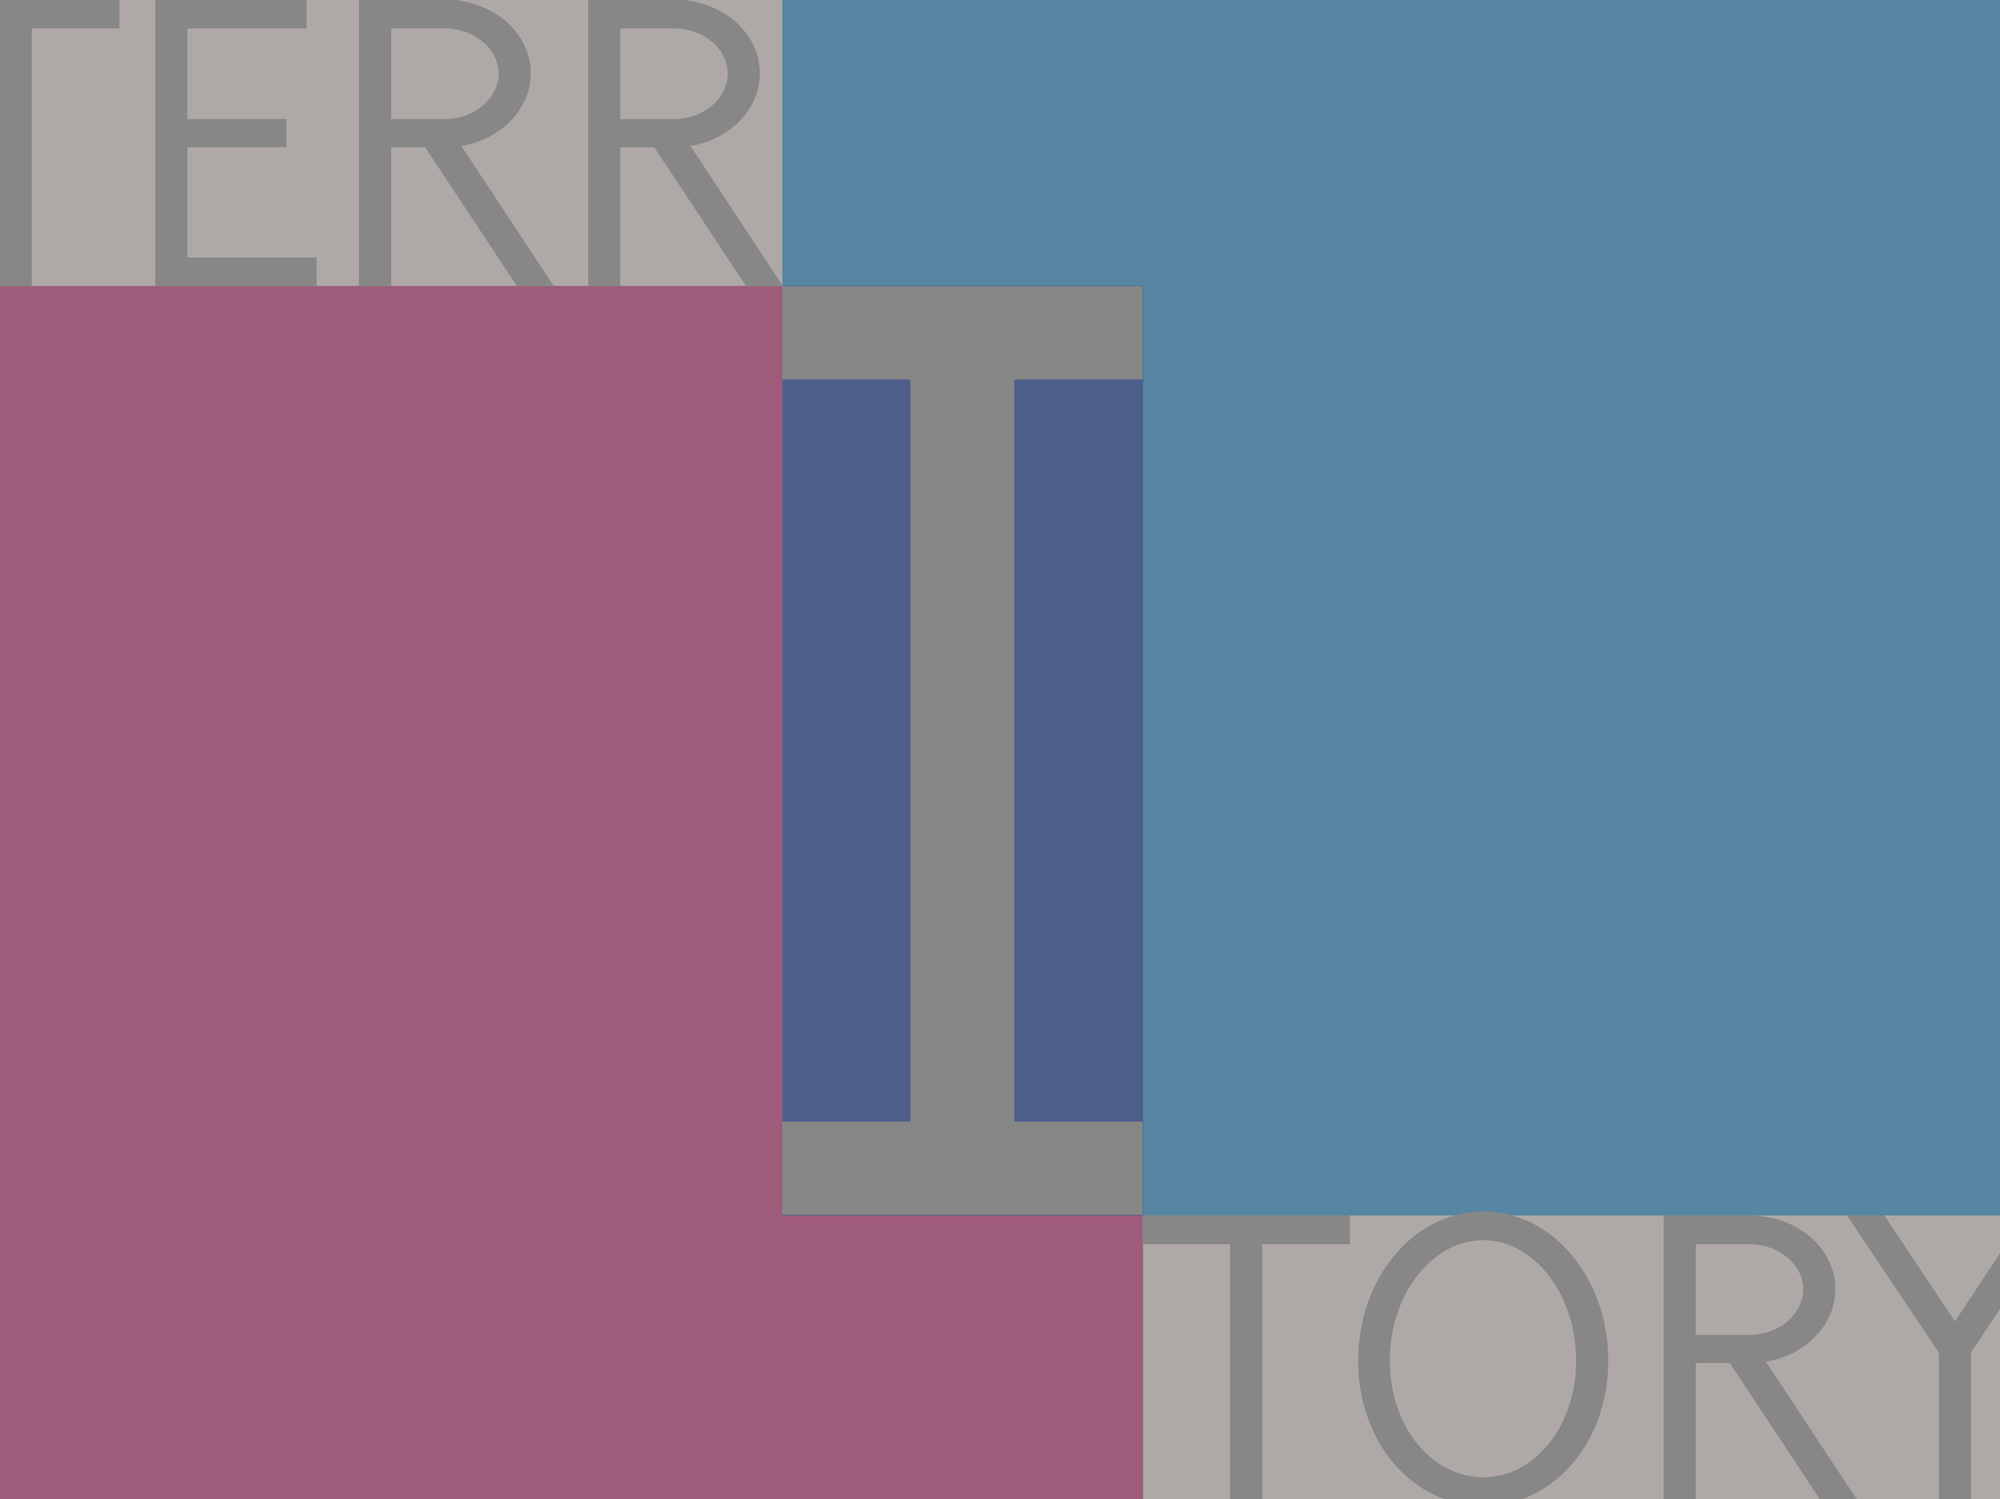 Rectangle poster design, shows the word ‘Territory’ in stretched light grey capital letters on a light green and pink background